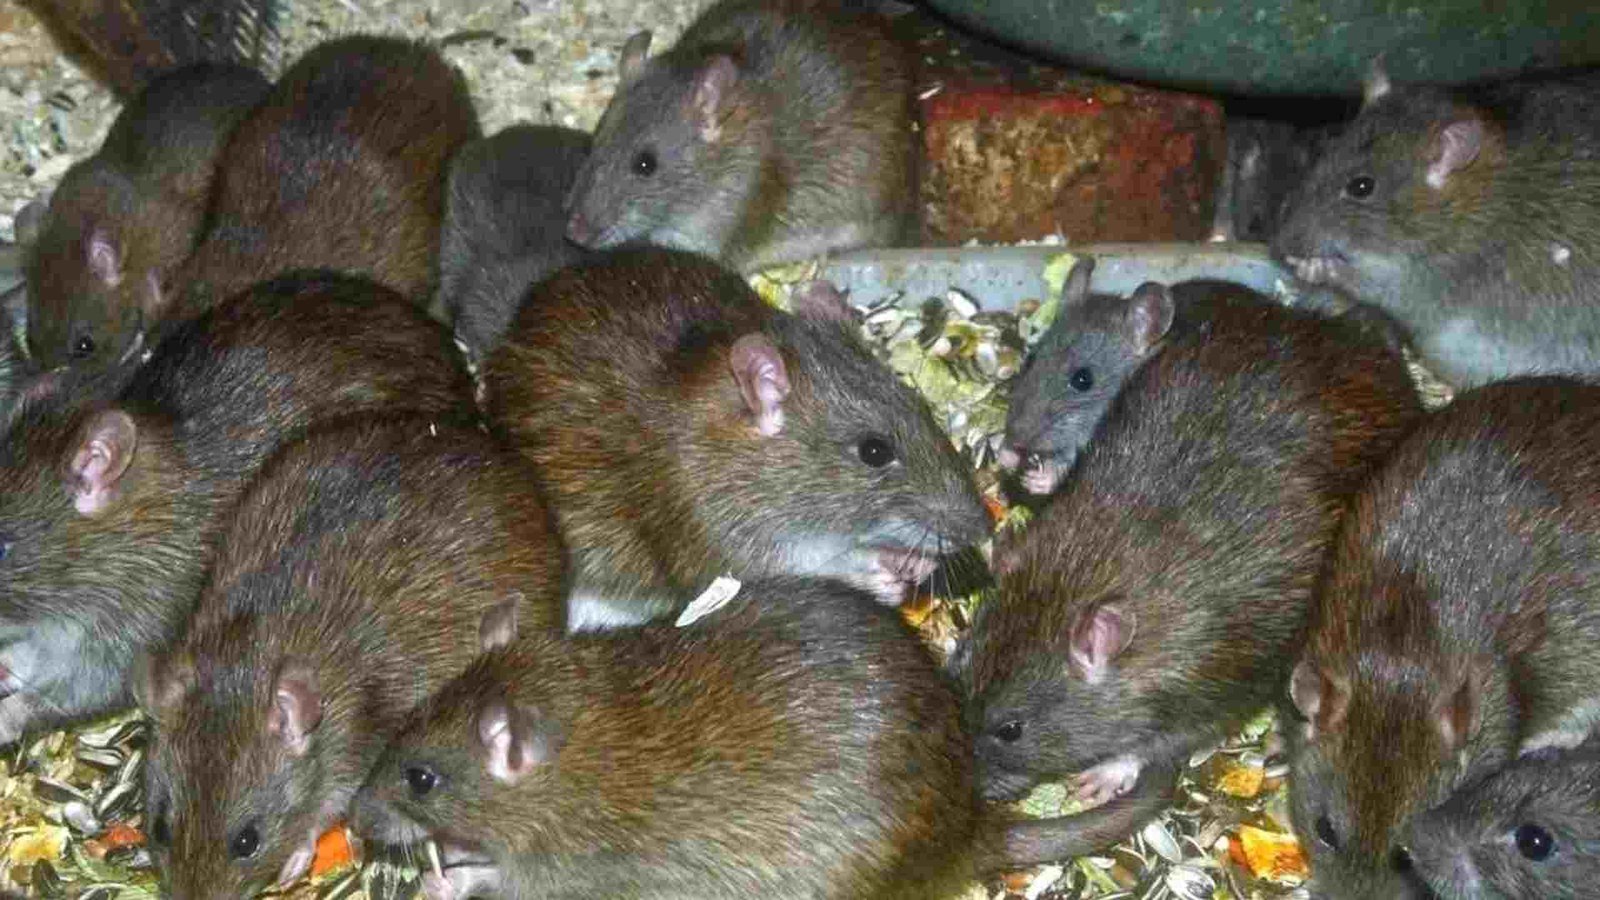 Preventing Rodent Infestations in NYC Warehouses and Storage Facilities